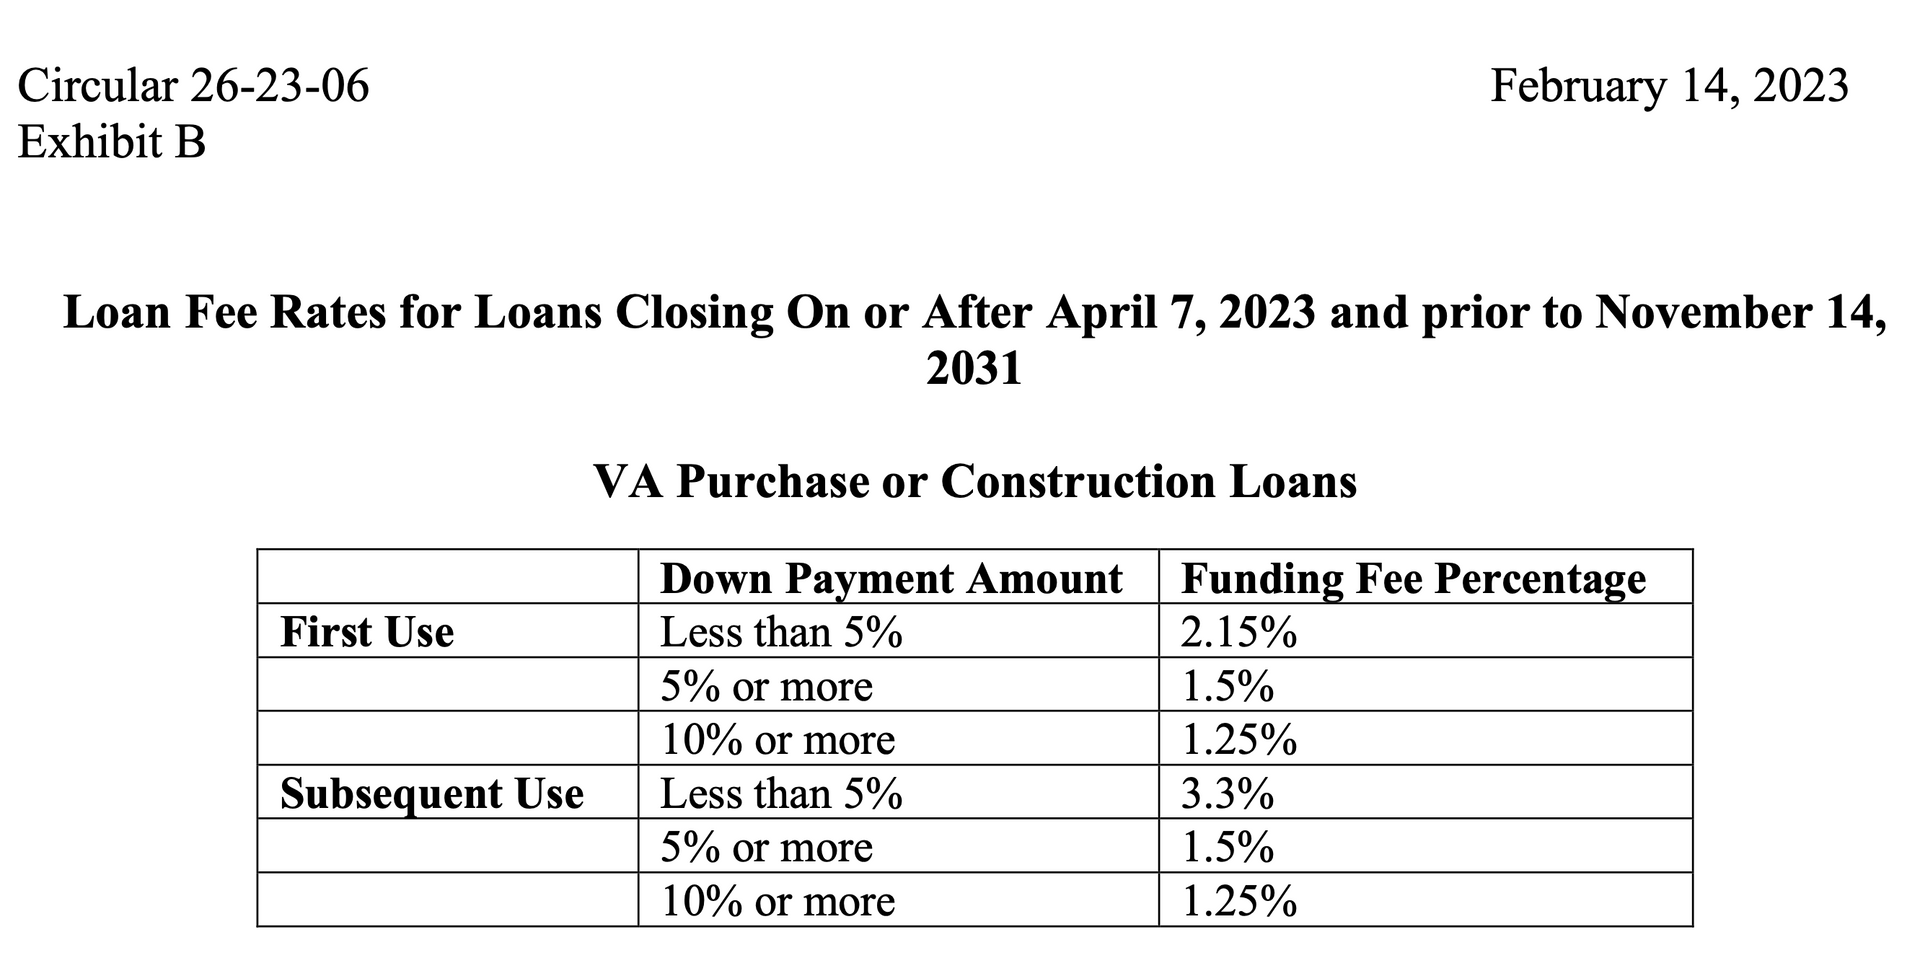 Extract from VA Circular 26-23-06 Exhibit B which shows the changes in the VA Loan fees.